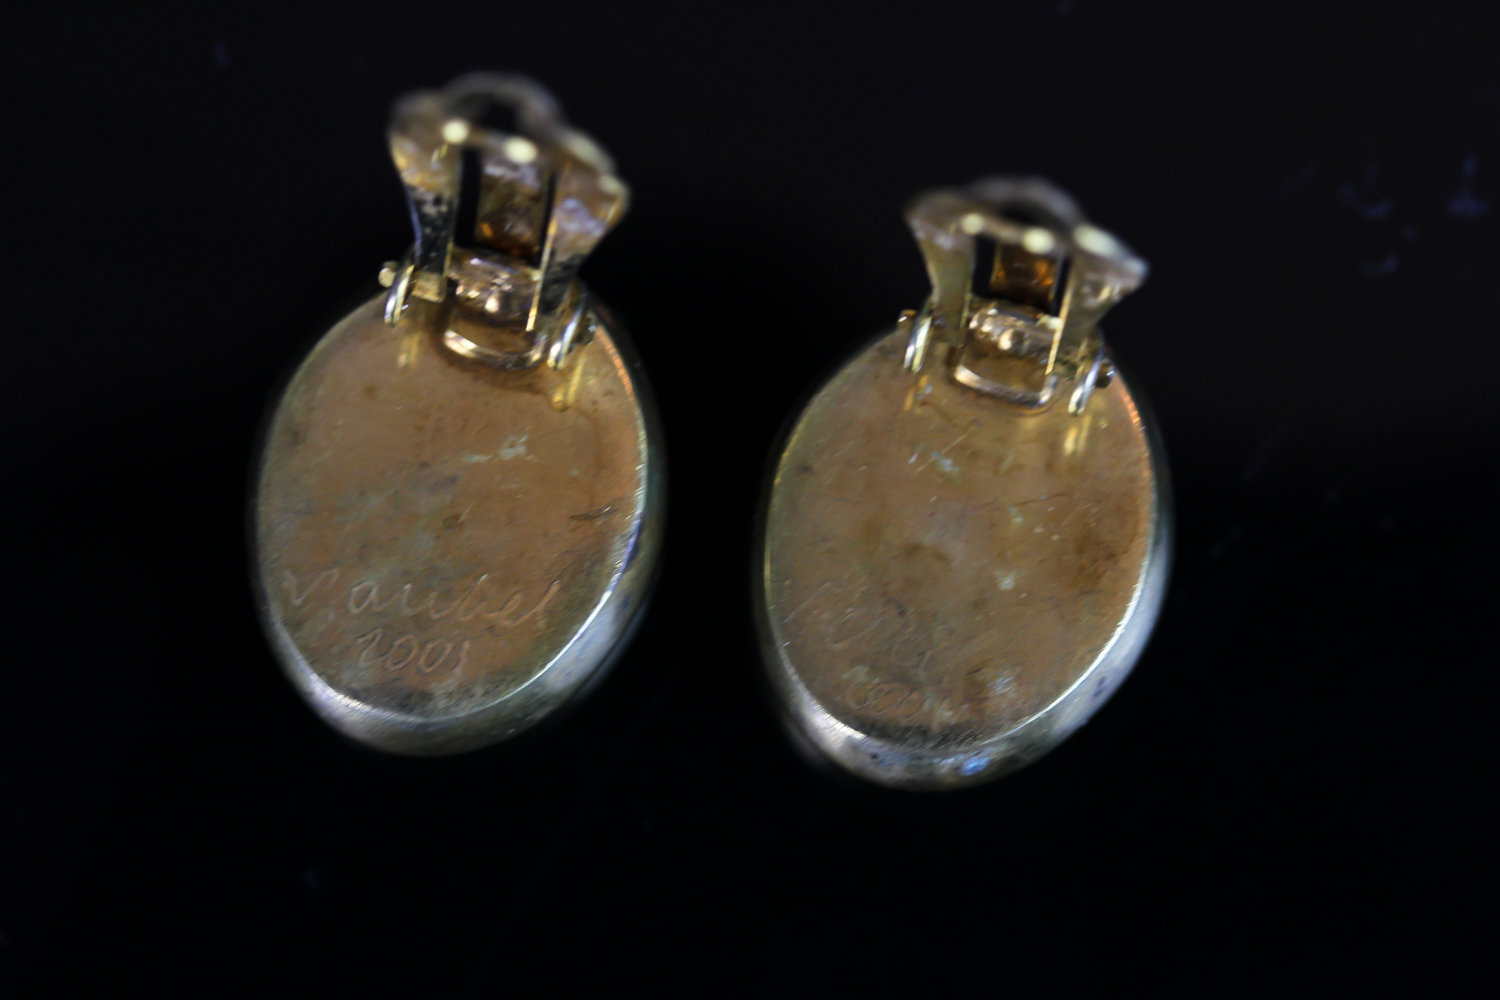 Vaubel, New York designer clip on earrings, 21x17.5mm domes, patinated finish, 18ct gold plated - Image 2 of 2